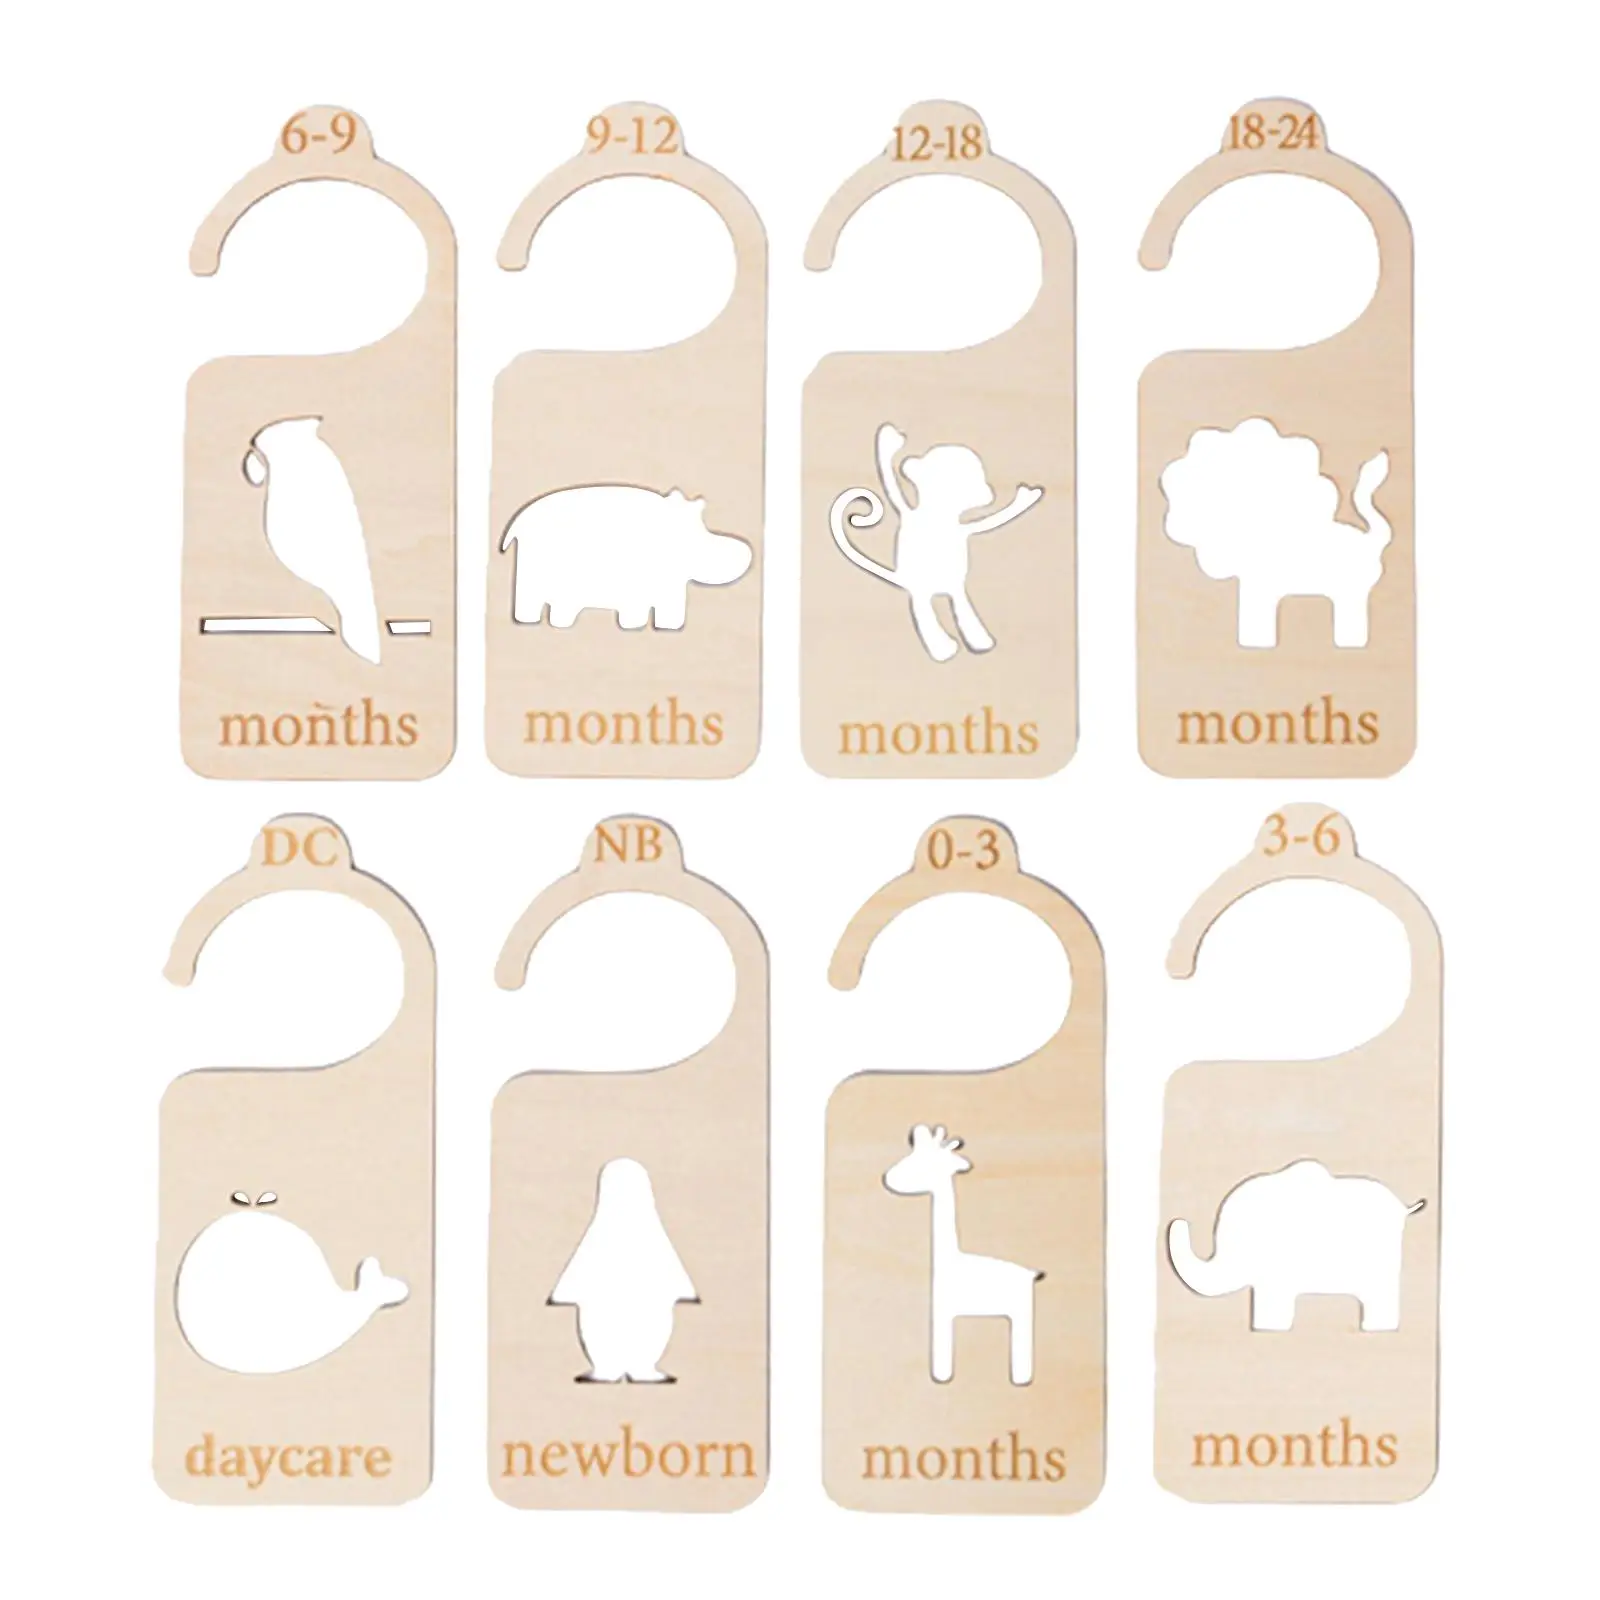 8 Pieces Wooden Baby Closet Size Dividers Cloth Size Organizers Hanger Adorable for Bedroom Clothes Home Wardrobe Nursery Decors